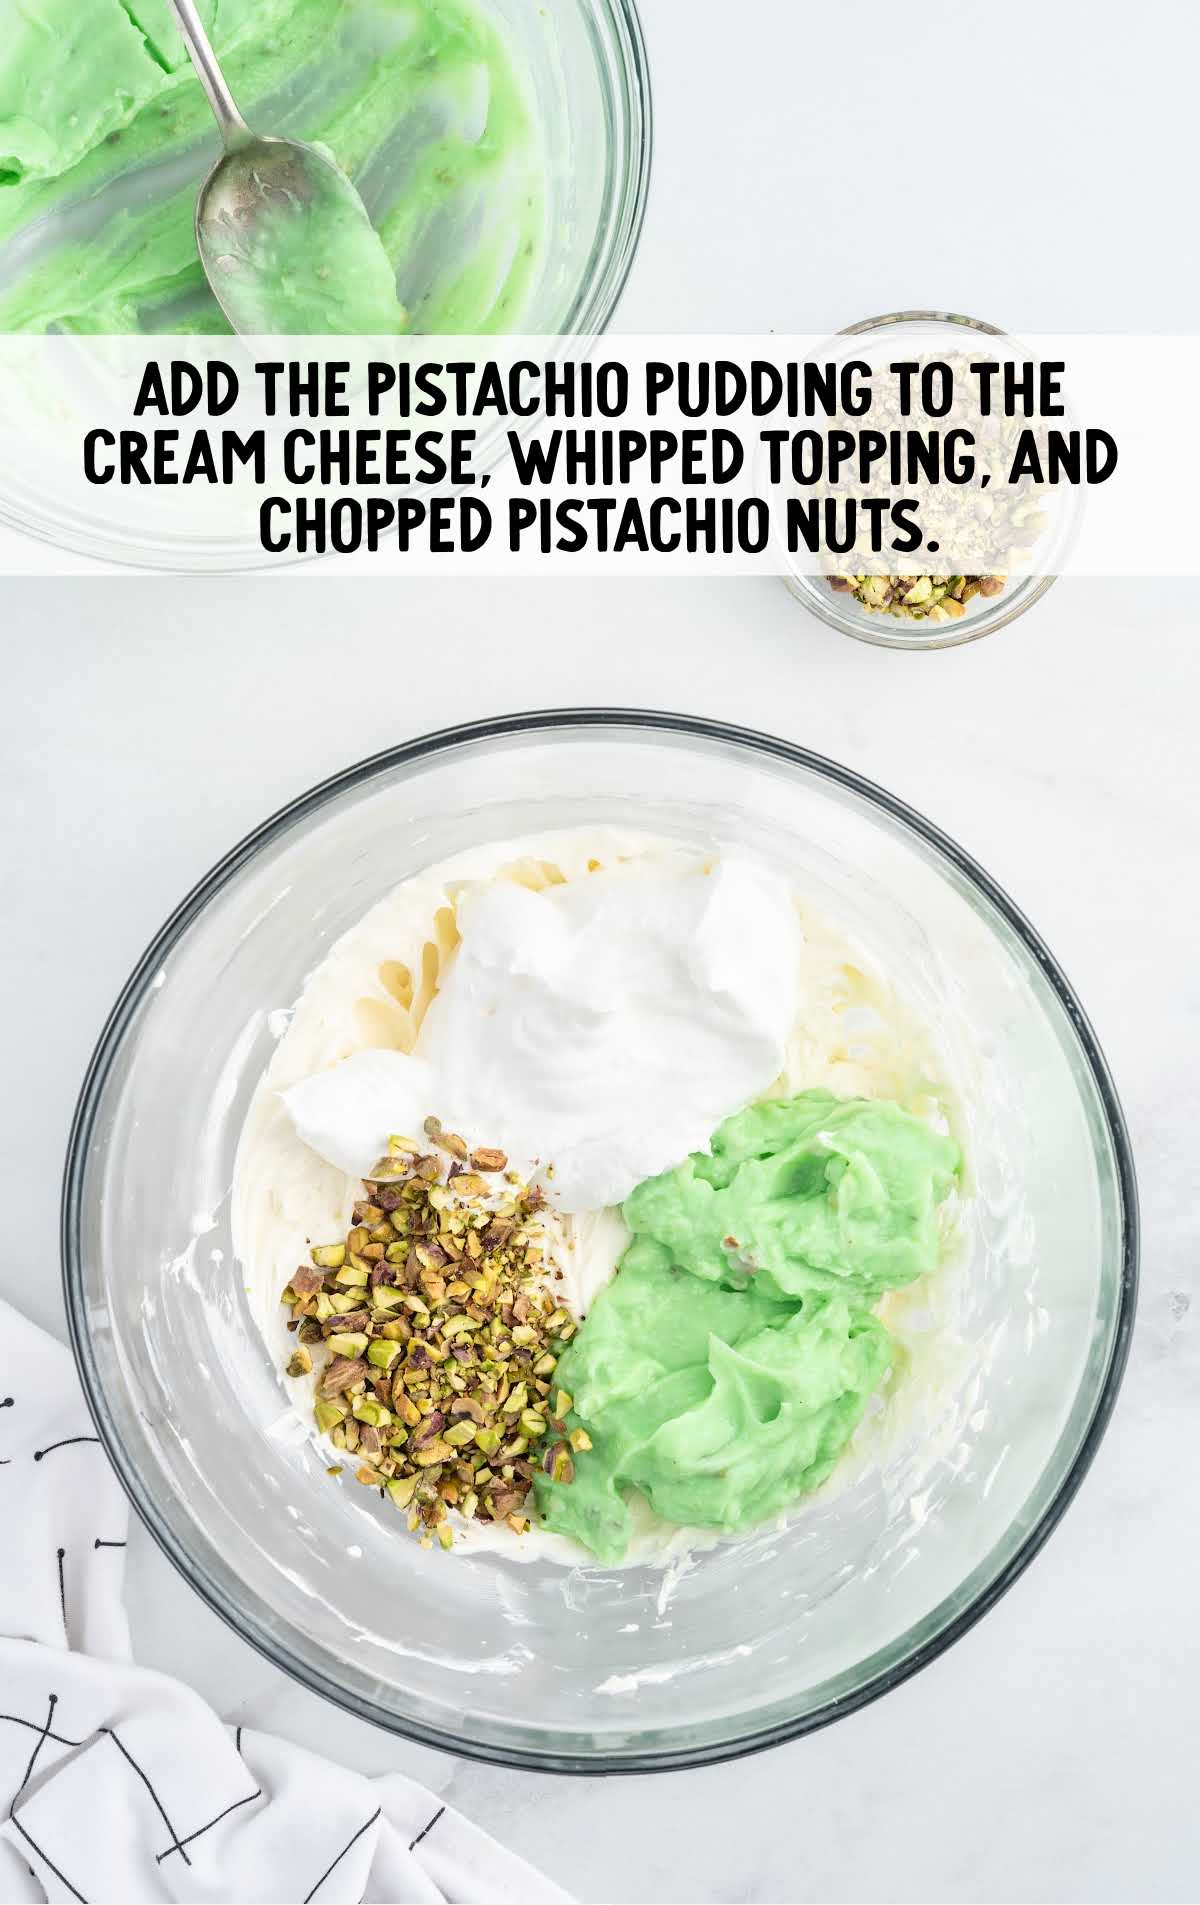 pistachio pudding added to the pie ingredients in a bowl